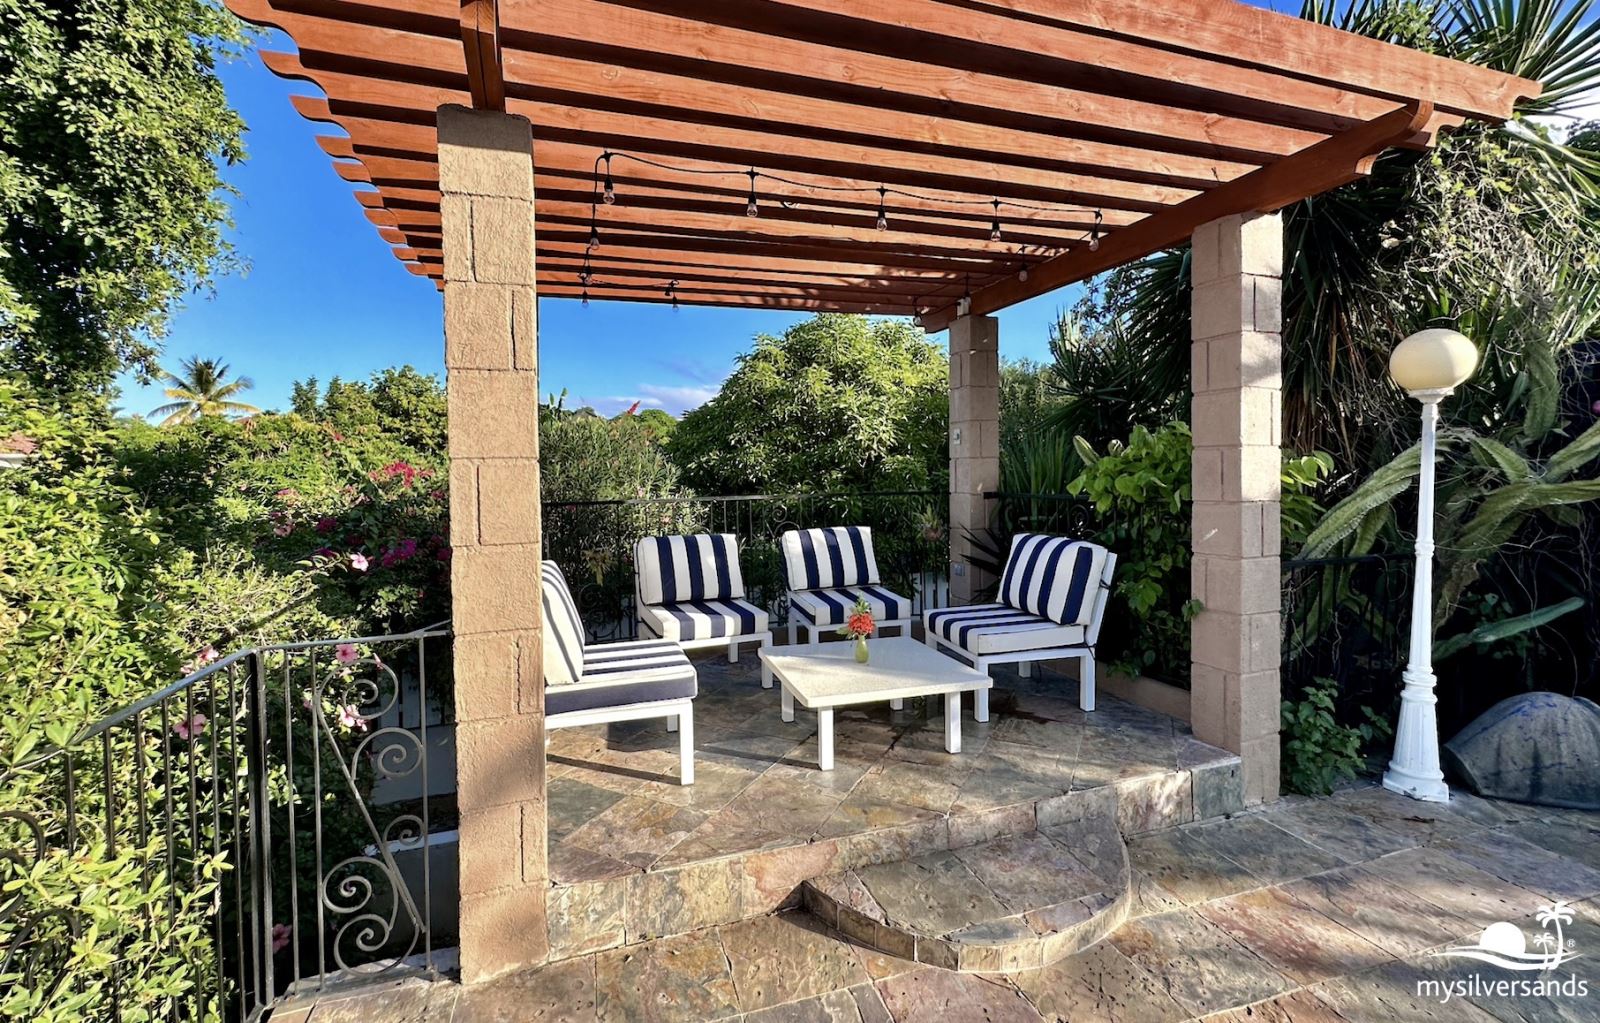 Poolside Pergola, a relaxing spot any time of day or night